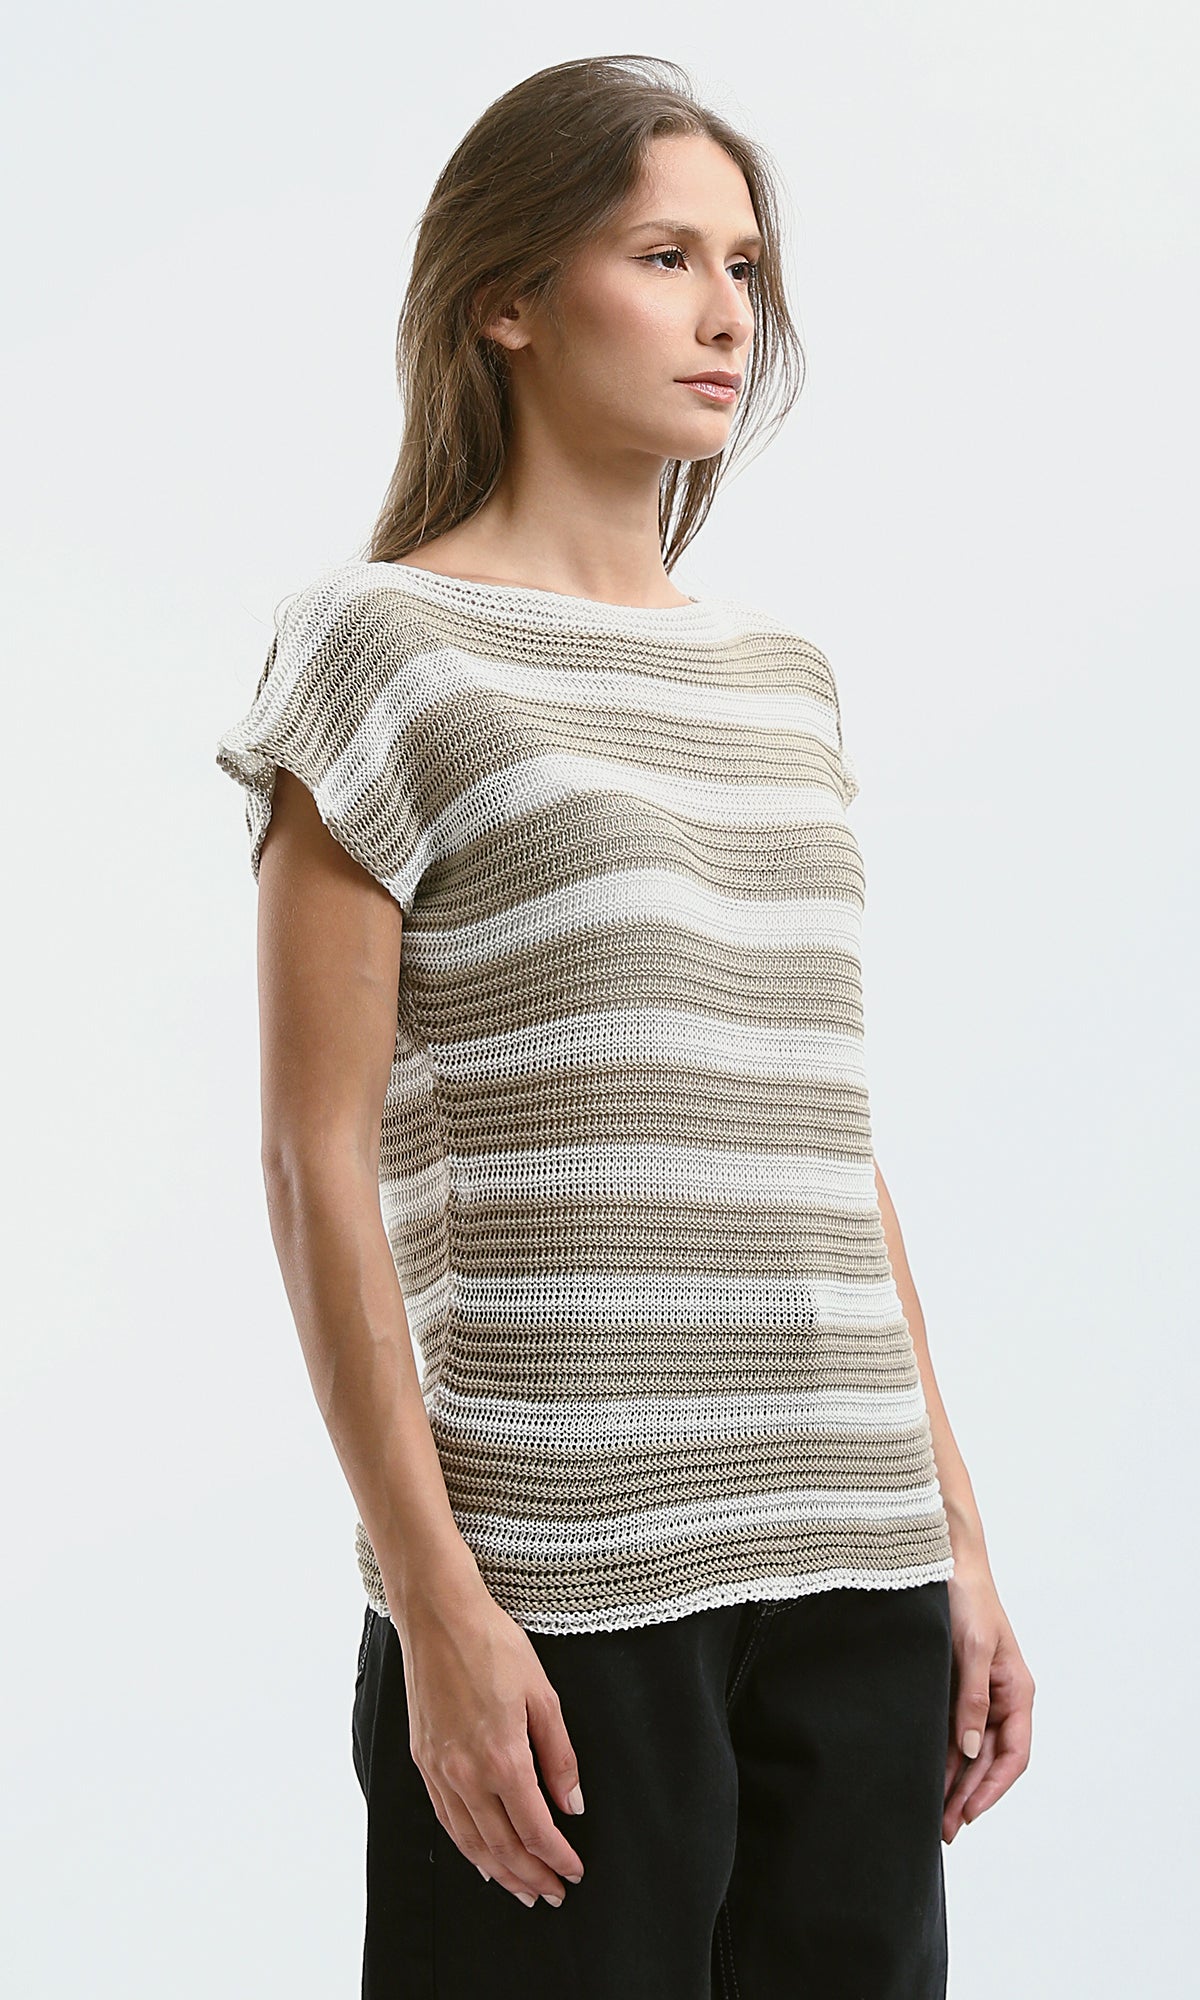 O182711 Striped Beige & White Knitted Short Sleeves Top